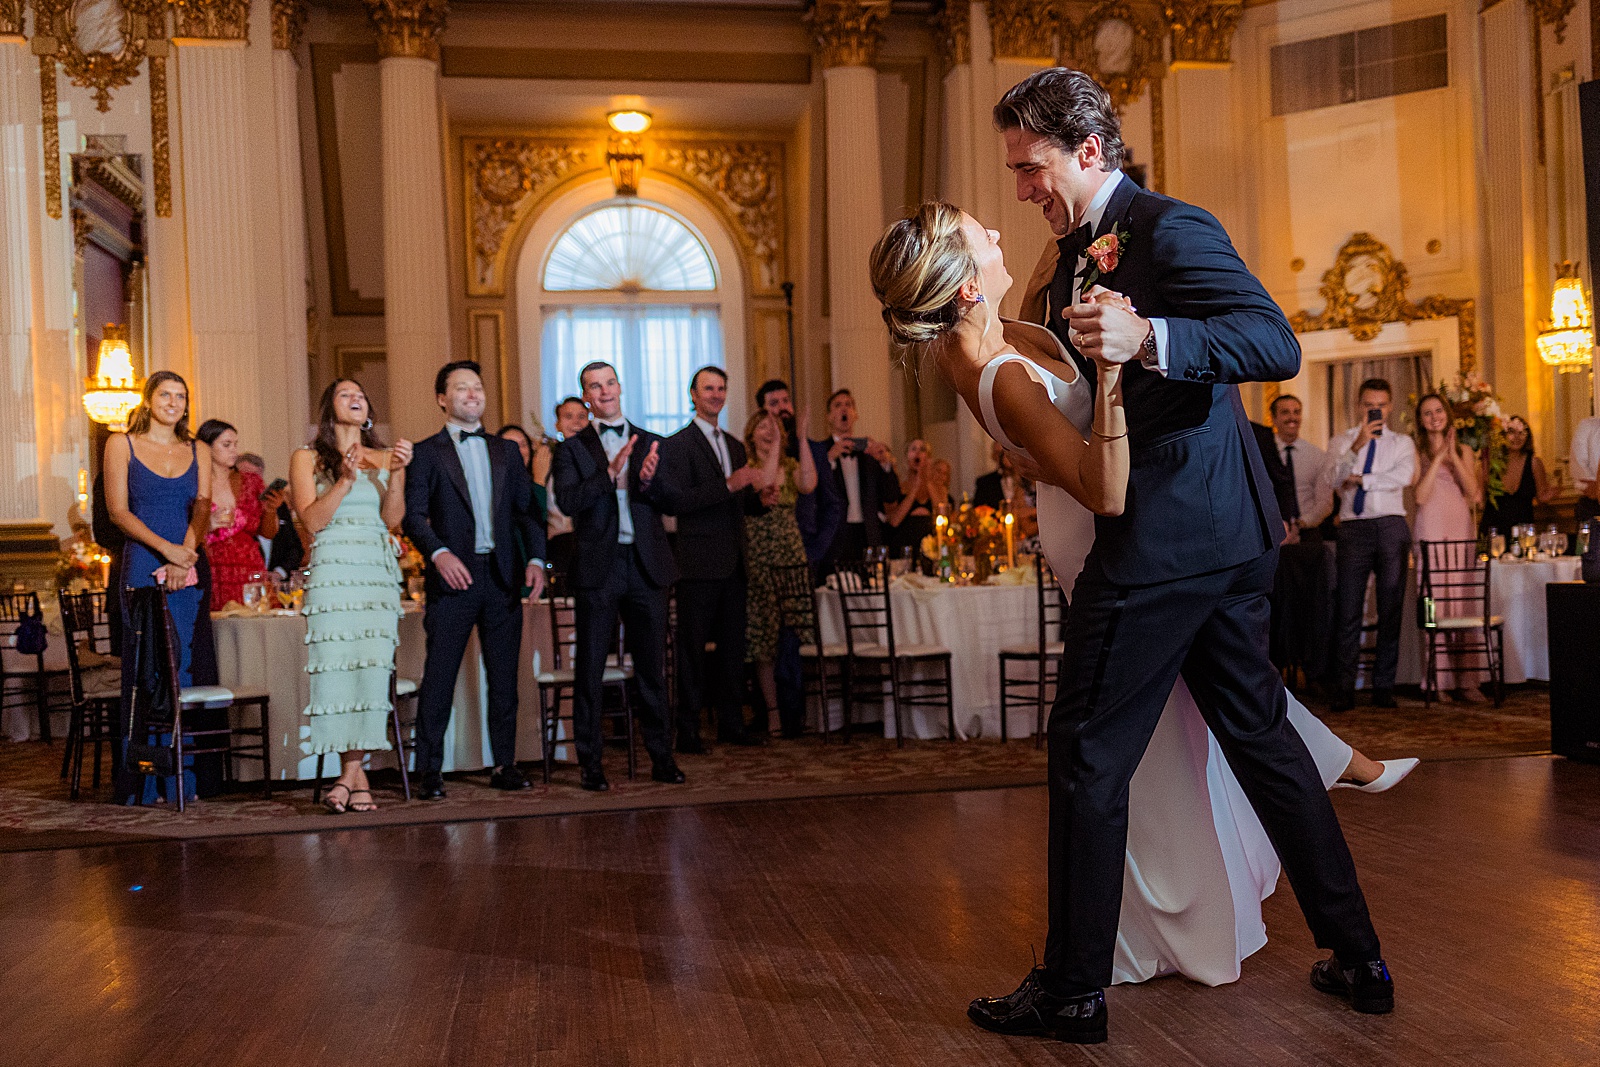 Groom dips brides during first dance